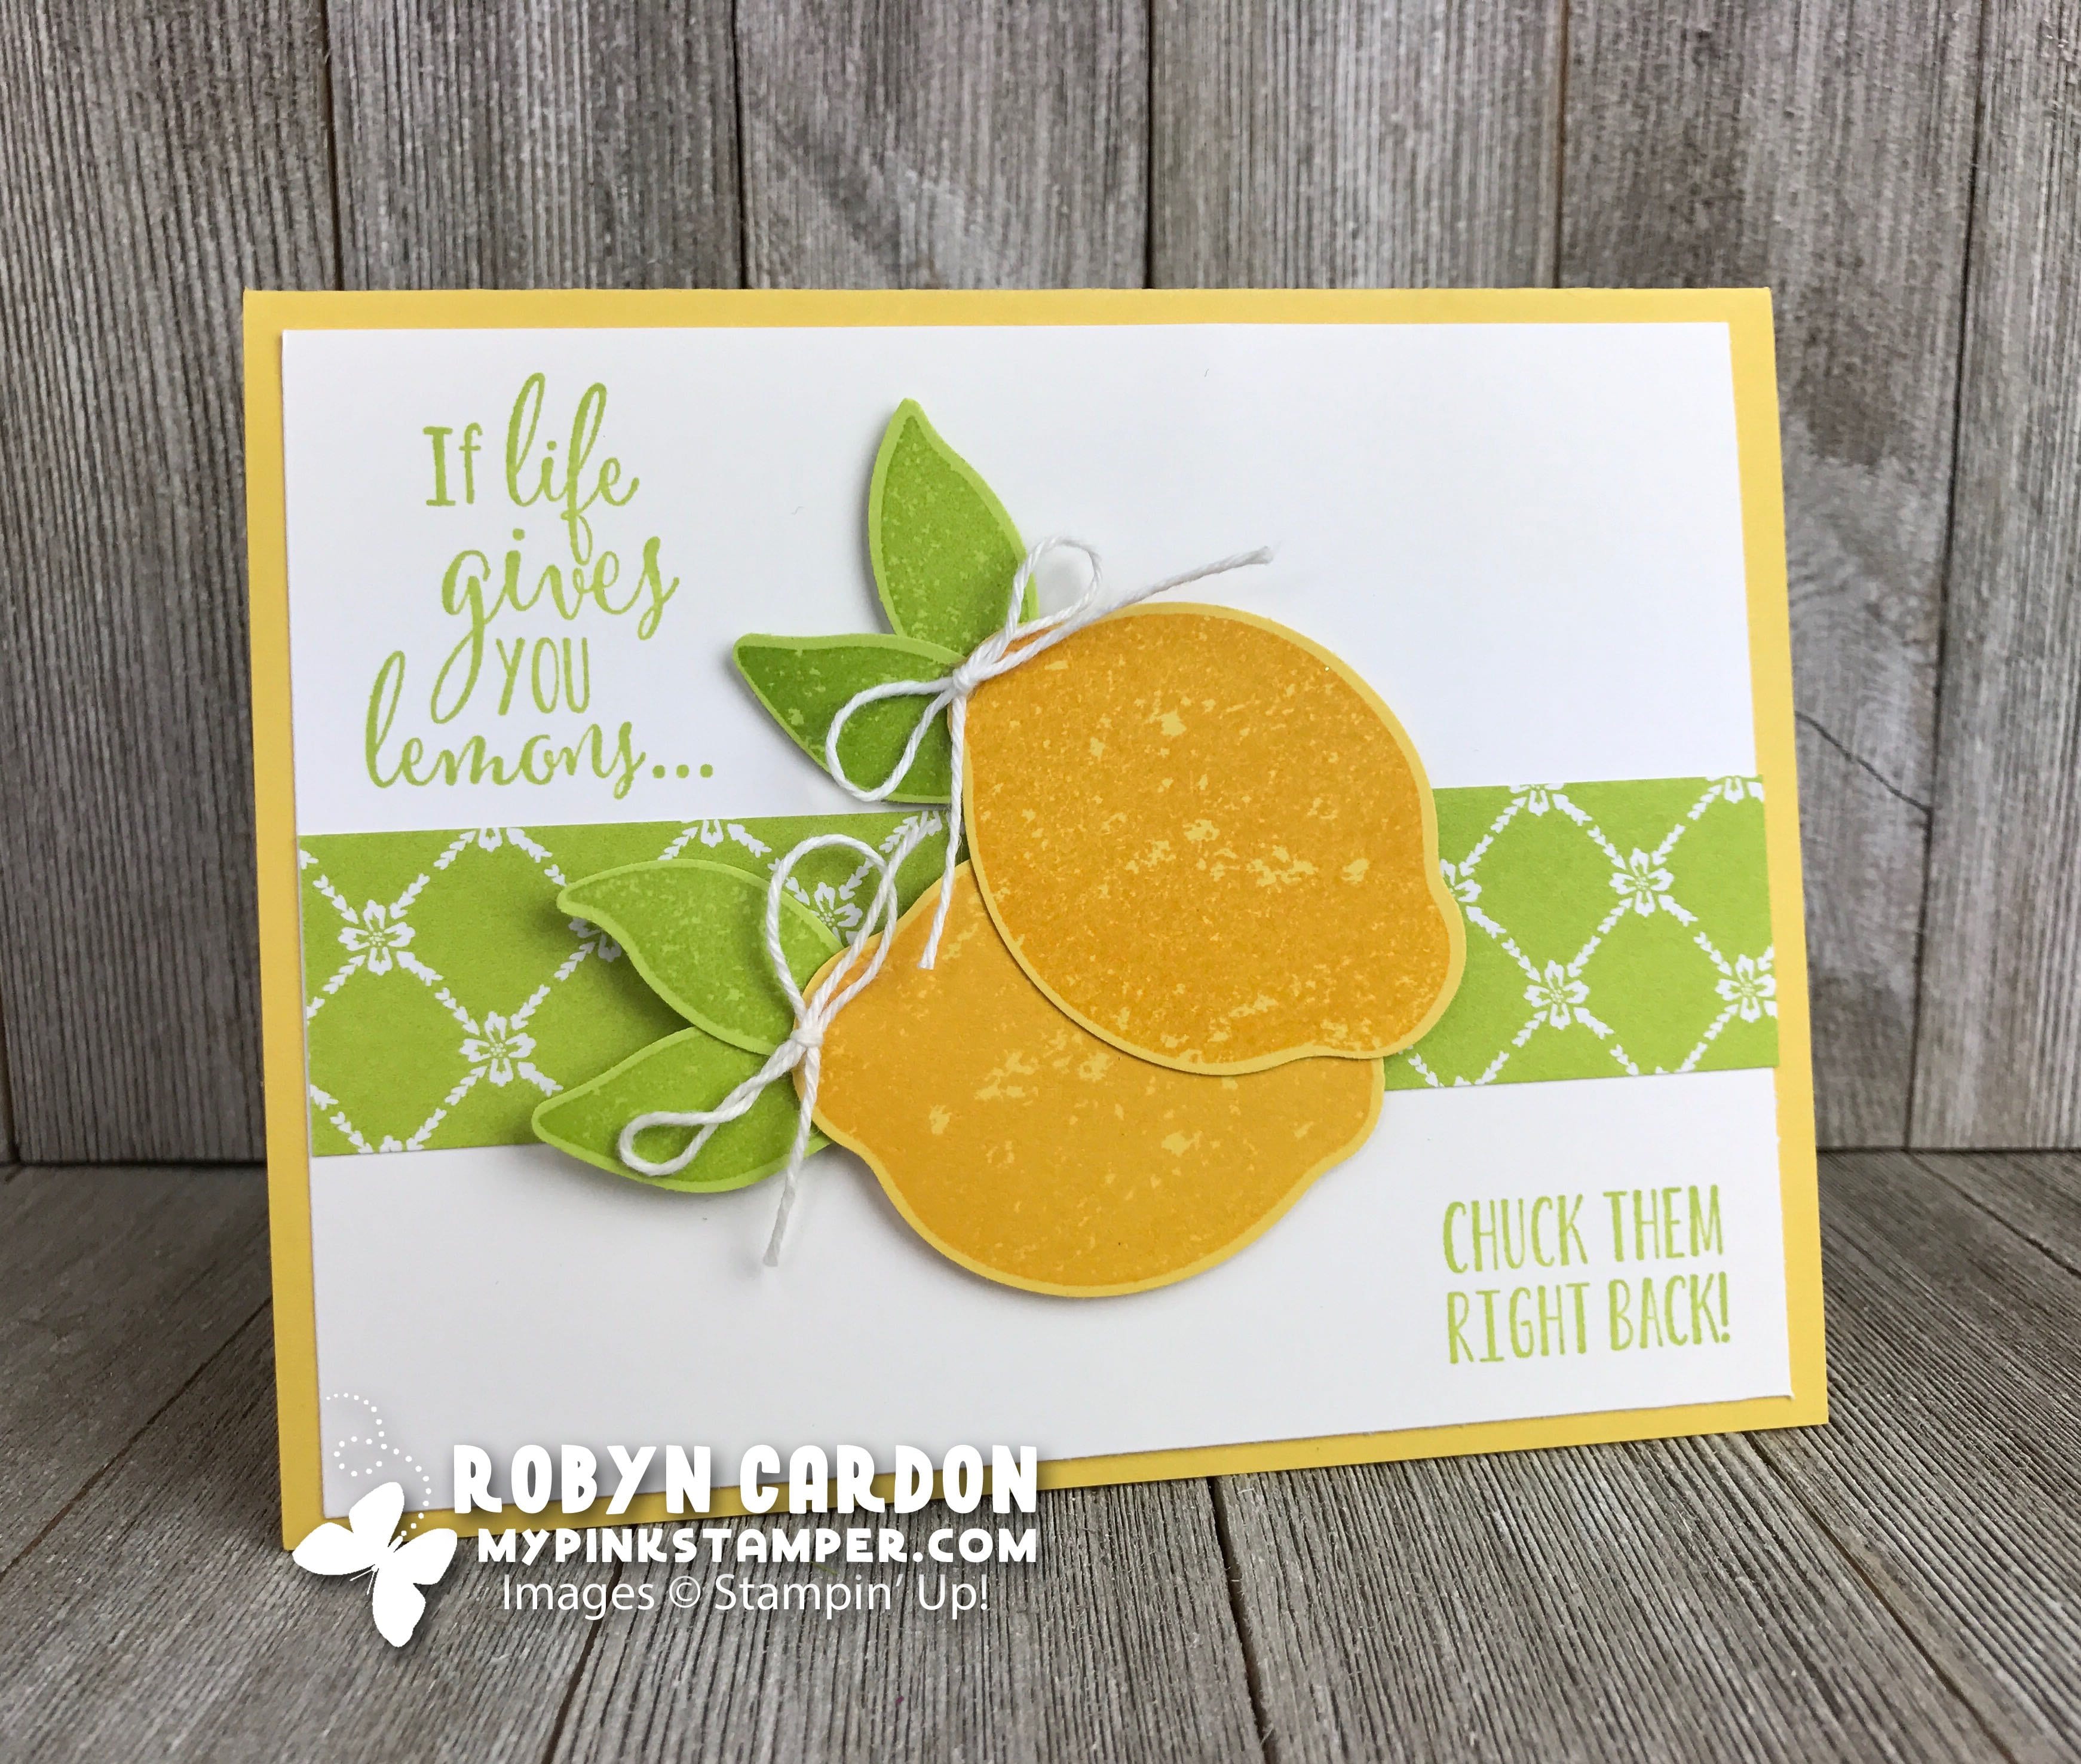 Days 20 & 21 – A Card a Day in May Giveaways & Winners!